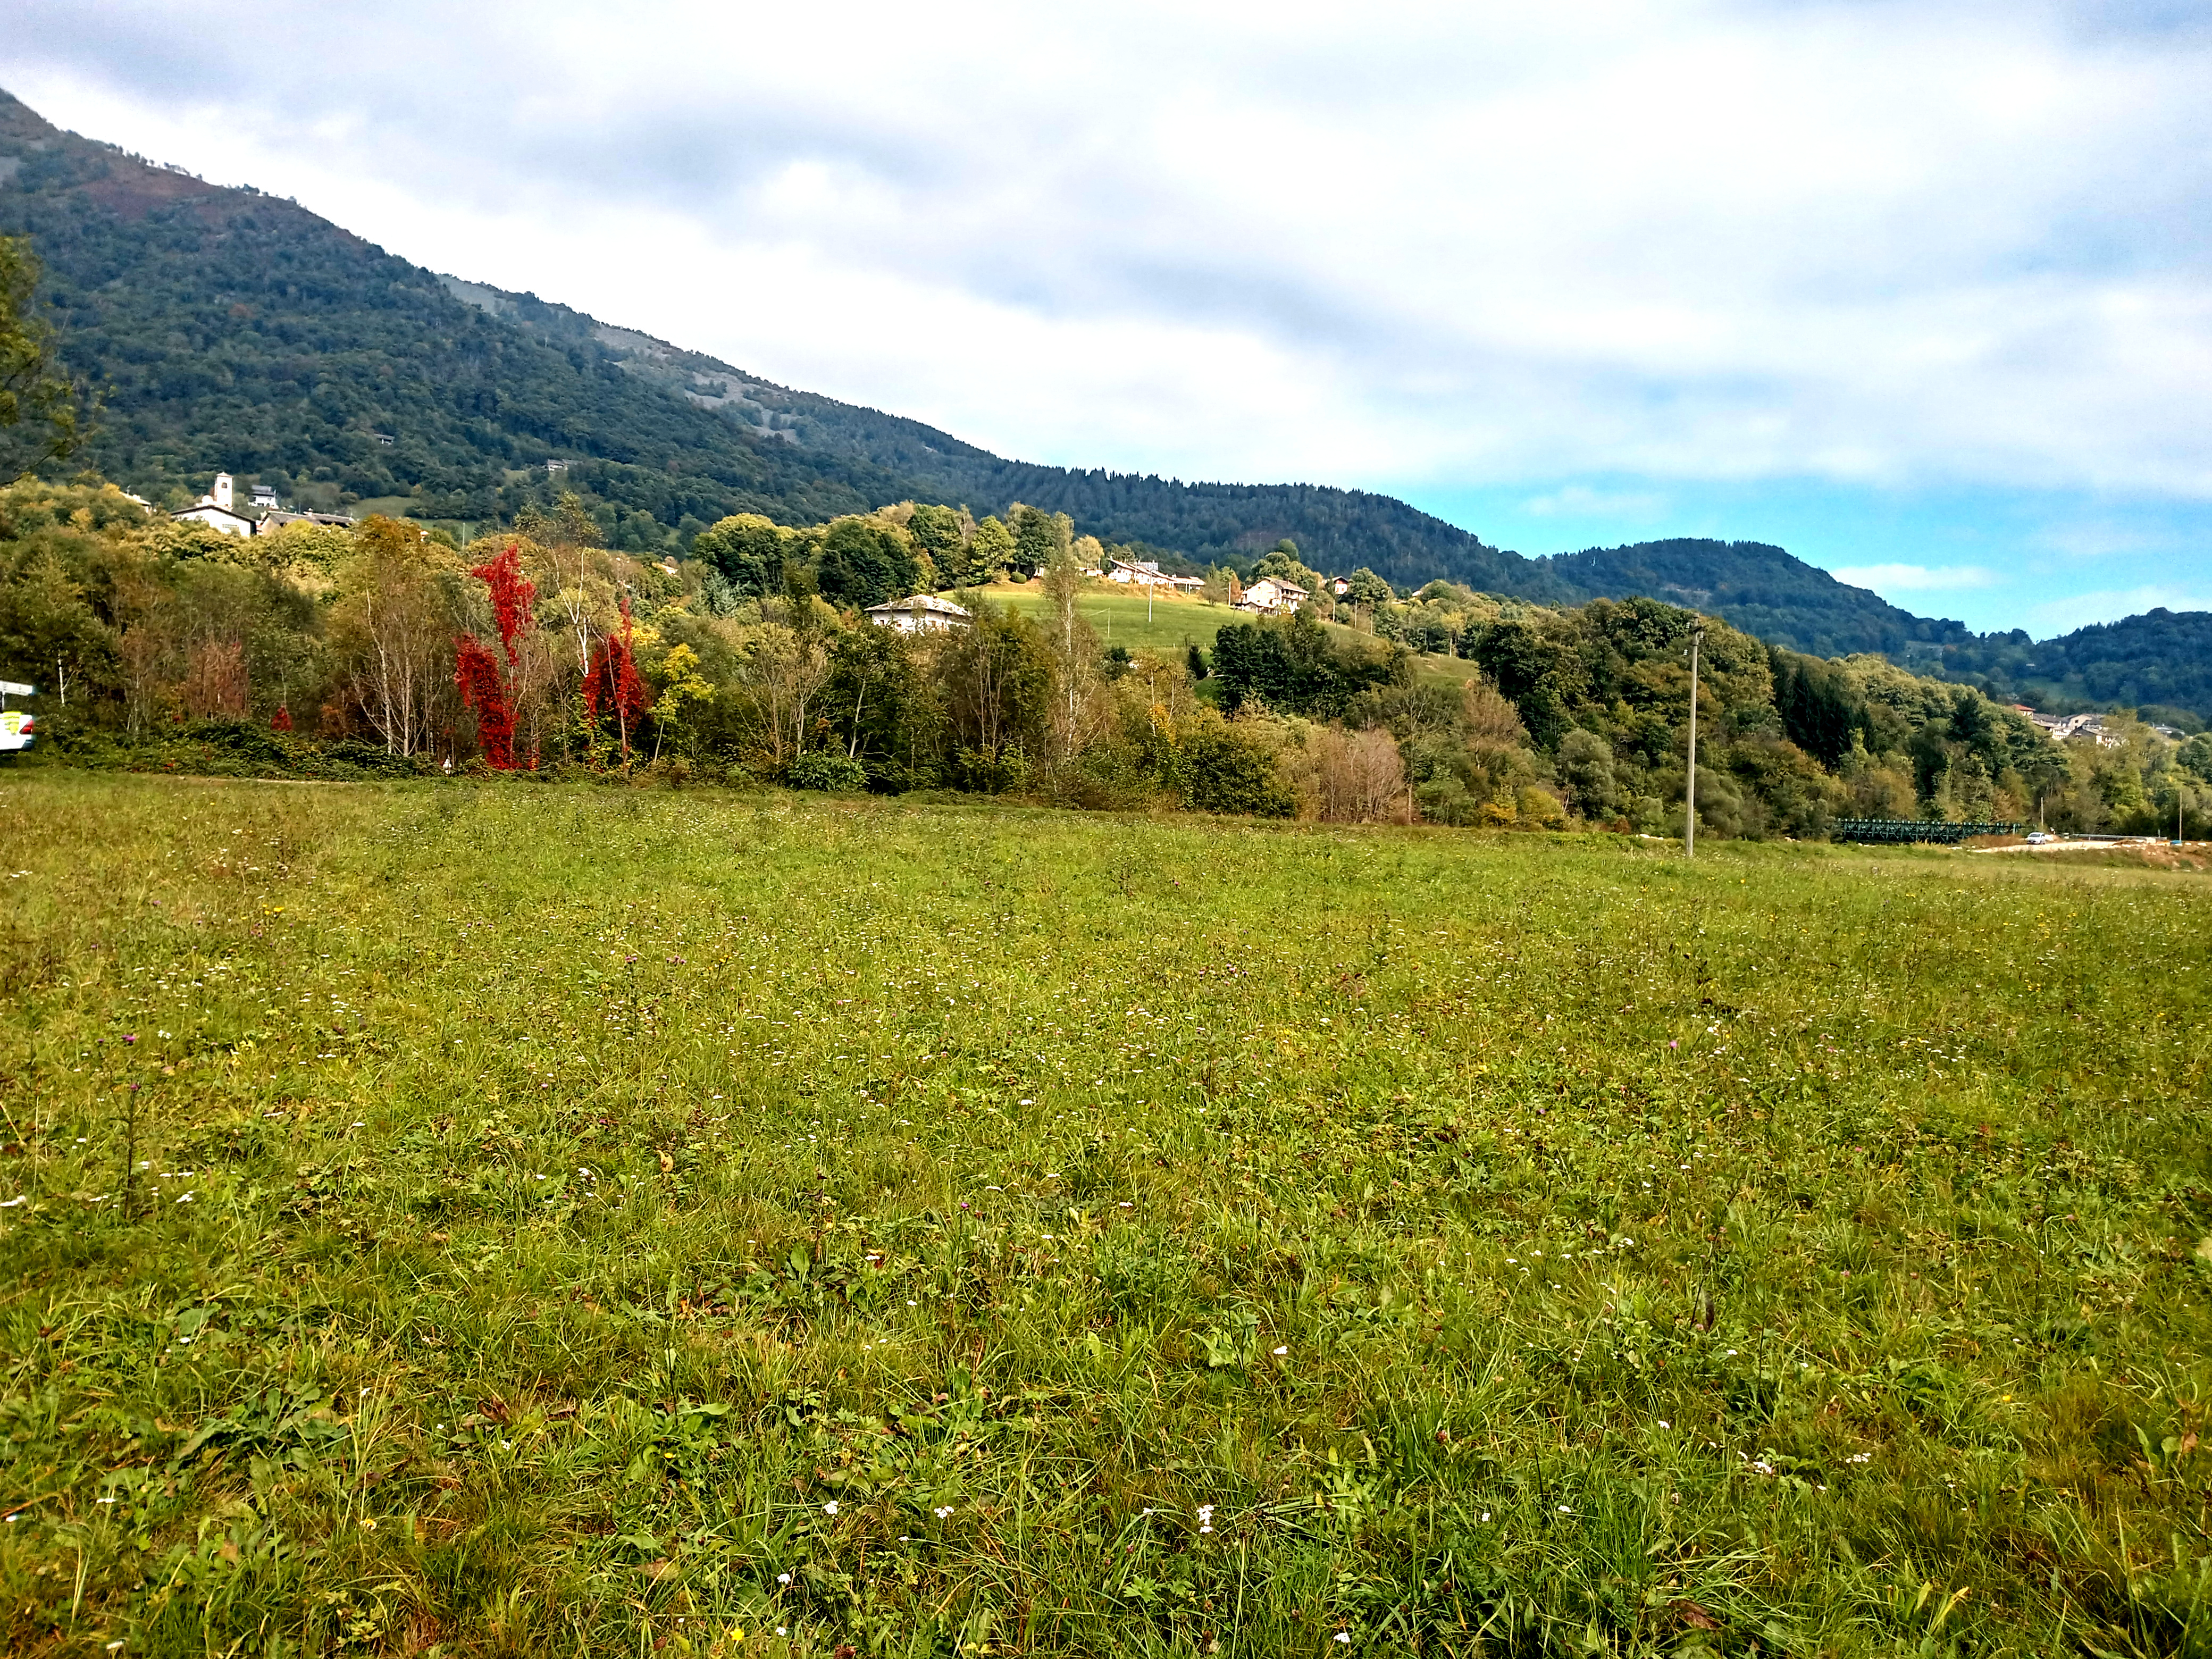 Flat area in the province of Turin